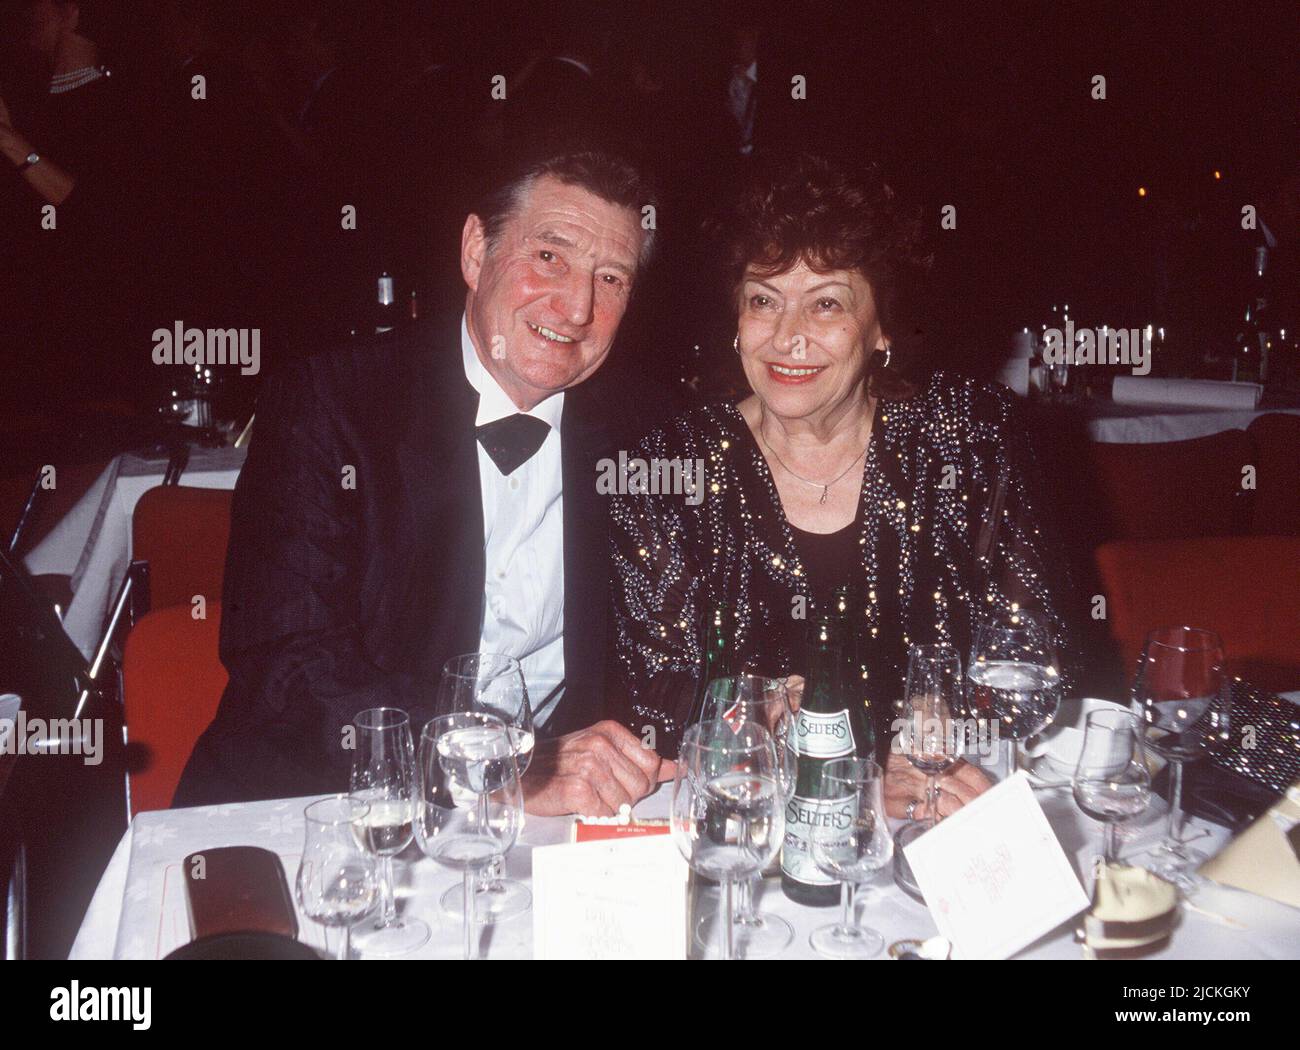 ARCHIVE PHOTO: 20 years ago, on June 17, 2002, soccer legend Fritz Walter died, 03SN FRITZWALTER021990SP.jpg Fritz WALTER, Germany, former soccer player, soccer world champion from 1954, is sitting with his wife Italia at the table at the Ball des Sports, 10/25/1995. Stock Photo